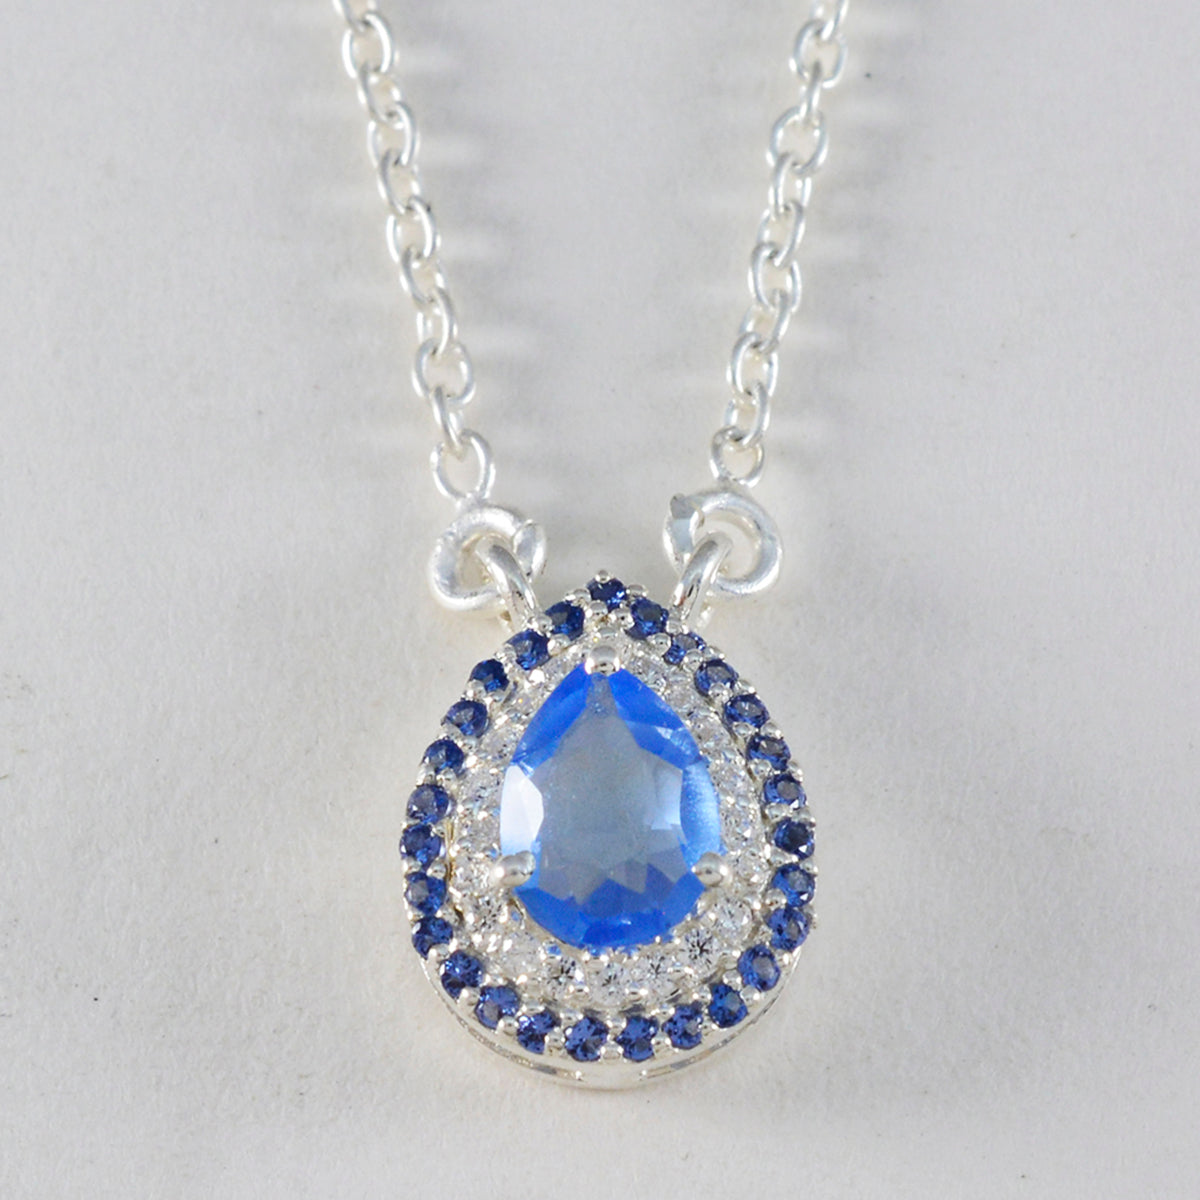 Riyo Nice Gemstone Pear Faceted Blue Blue Sapphire Cz Sterling Silver Pendant Gift For Friend